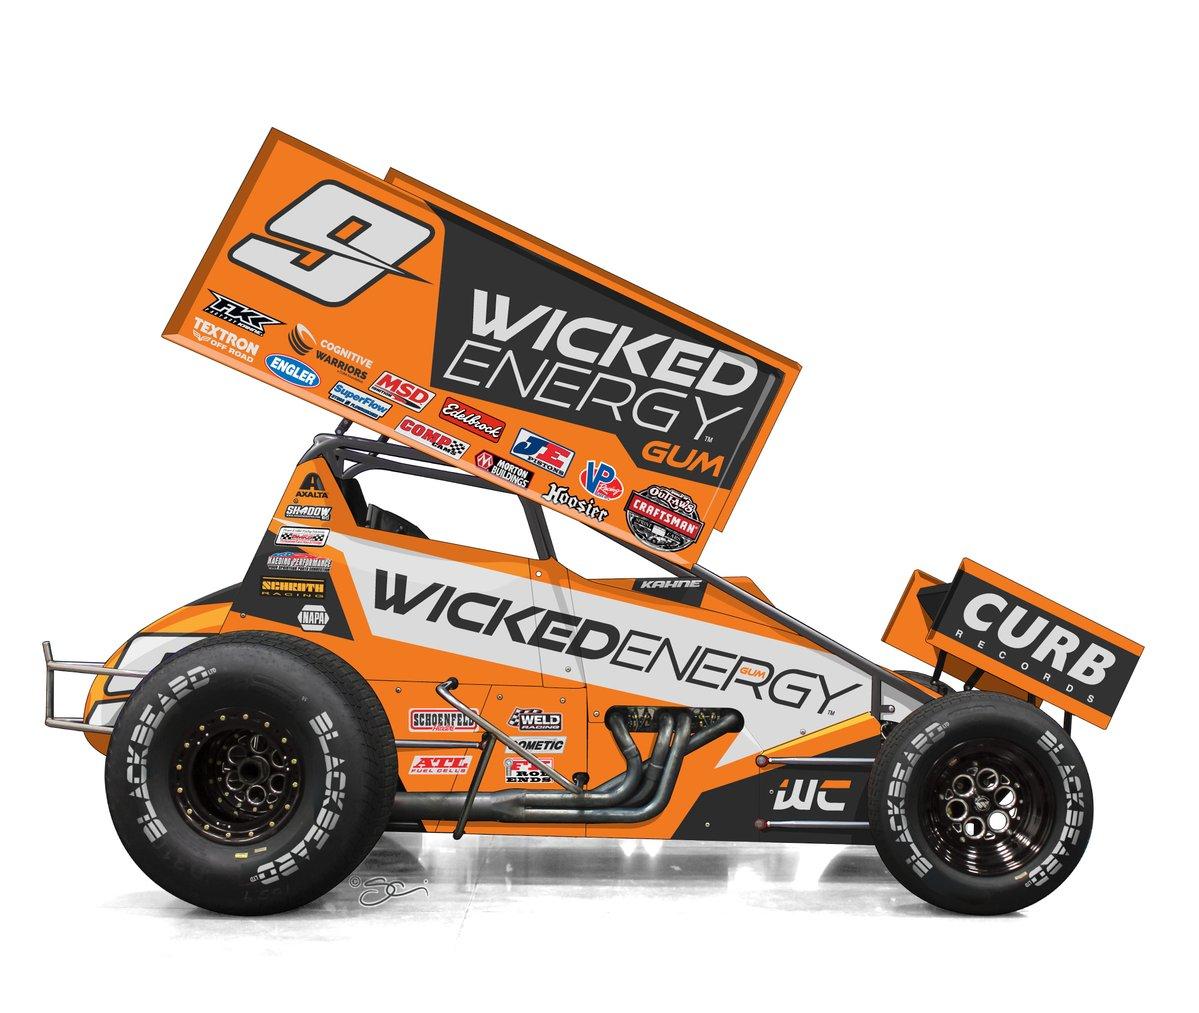 Preview of Kasey Kahne #9 Wicked Energy Gum 2019 World of Outlaws by Ryan Broderick